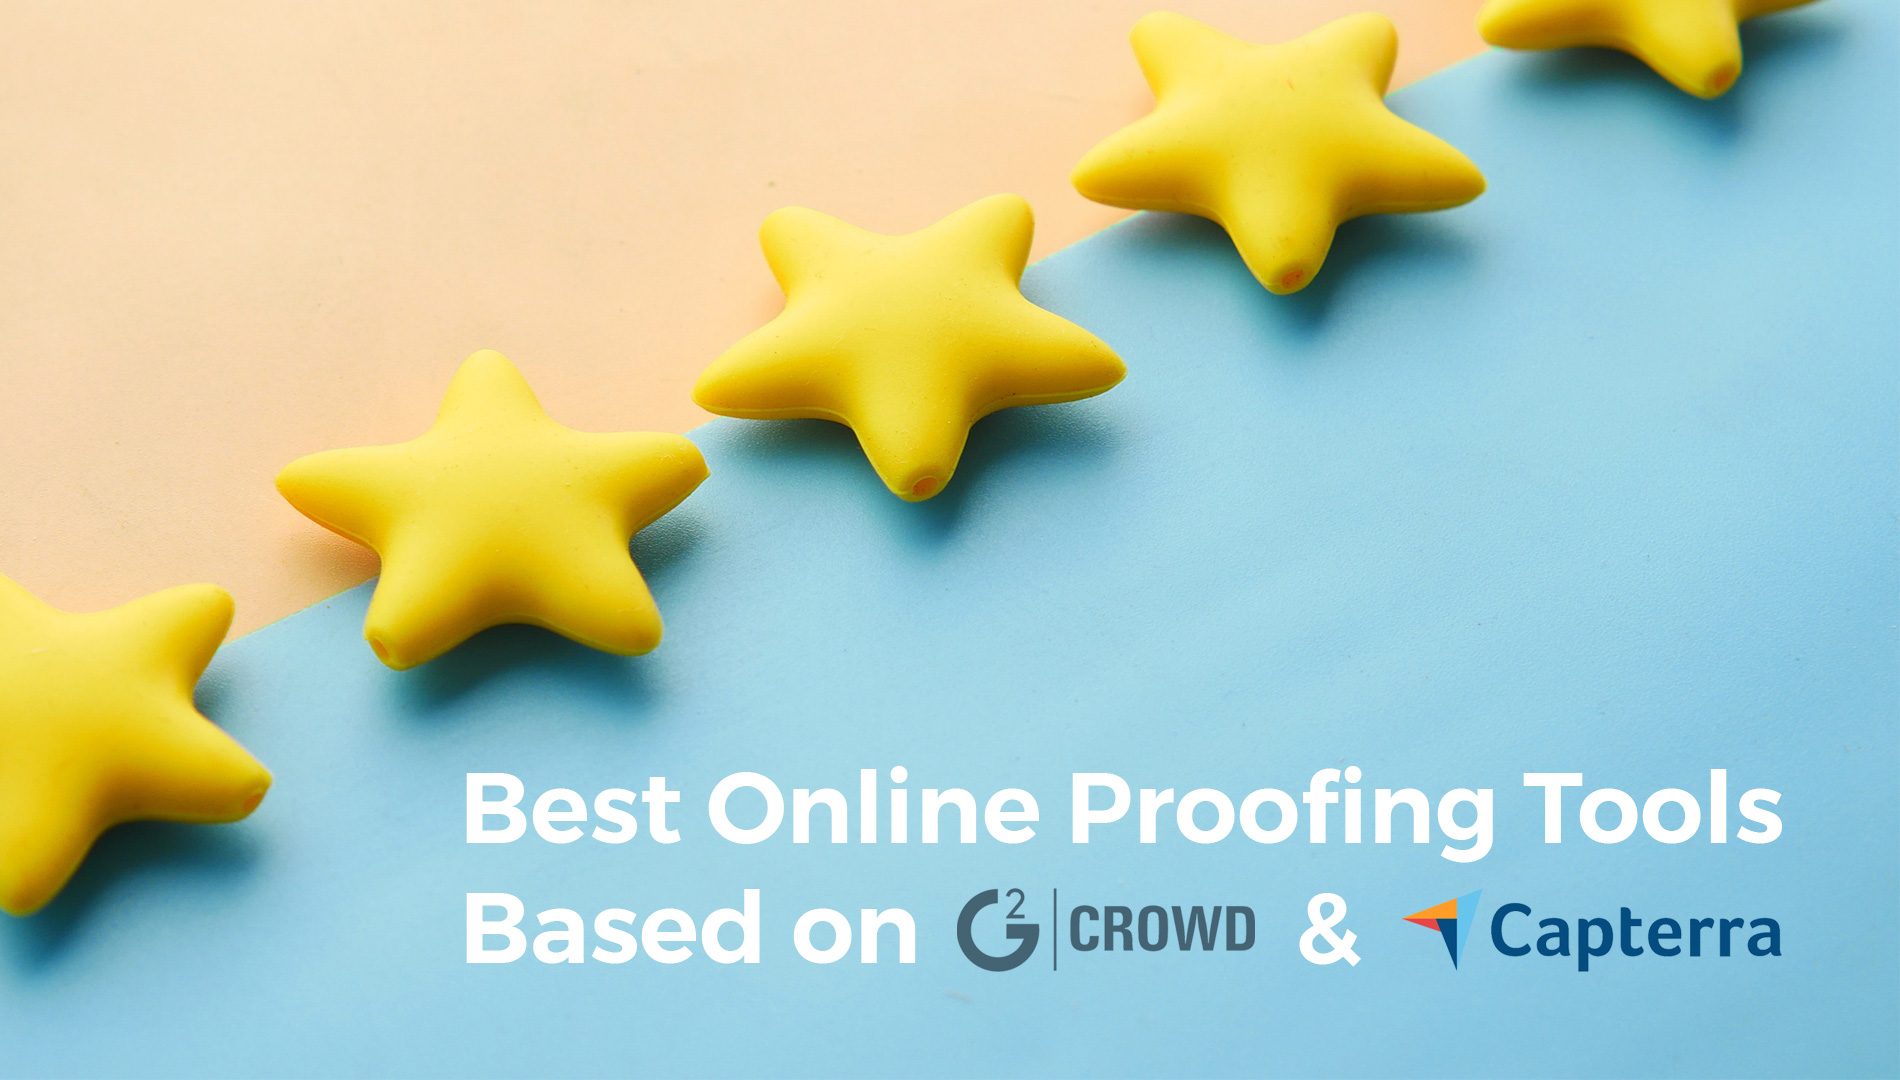 Best-Online-Proofing-Tools-Based-on-G2-and-Capterra-BANNER